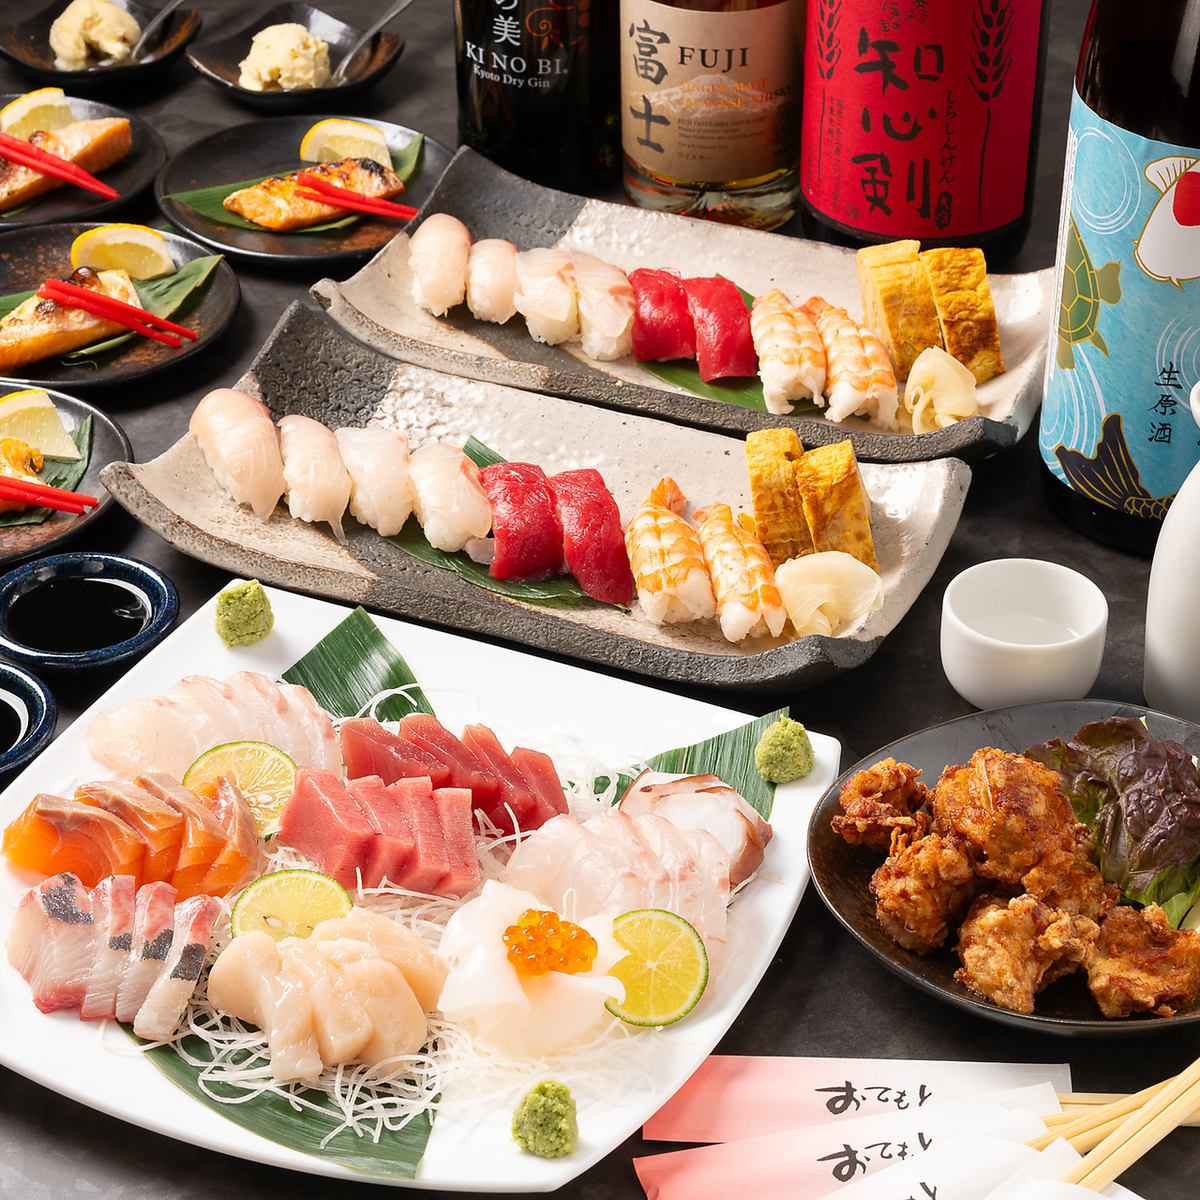 All-you-can-drink included♪ Recommended course with lots of fresh seafood!